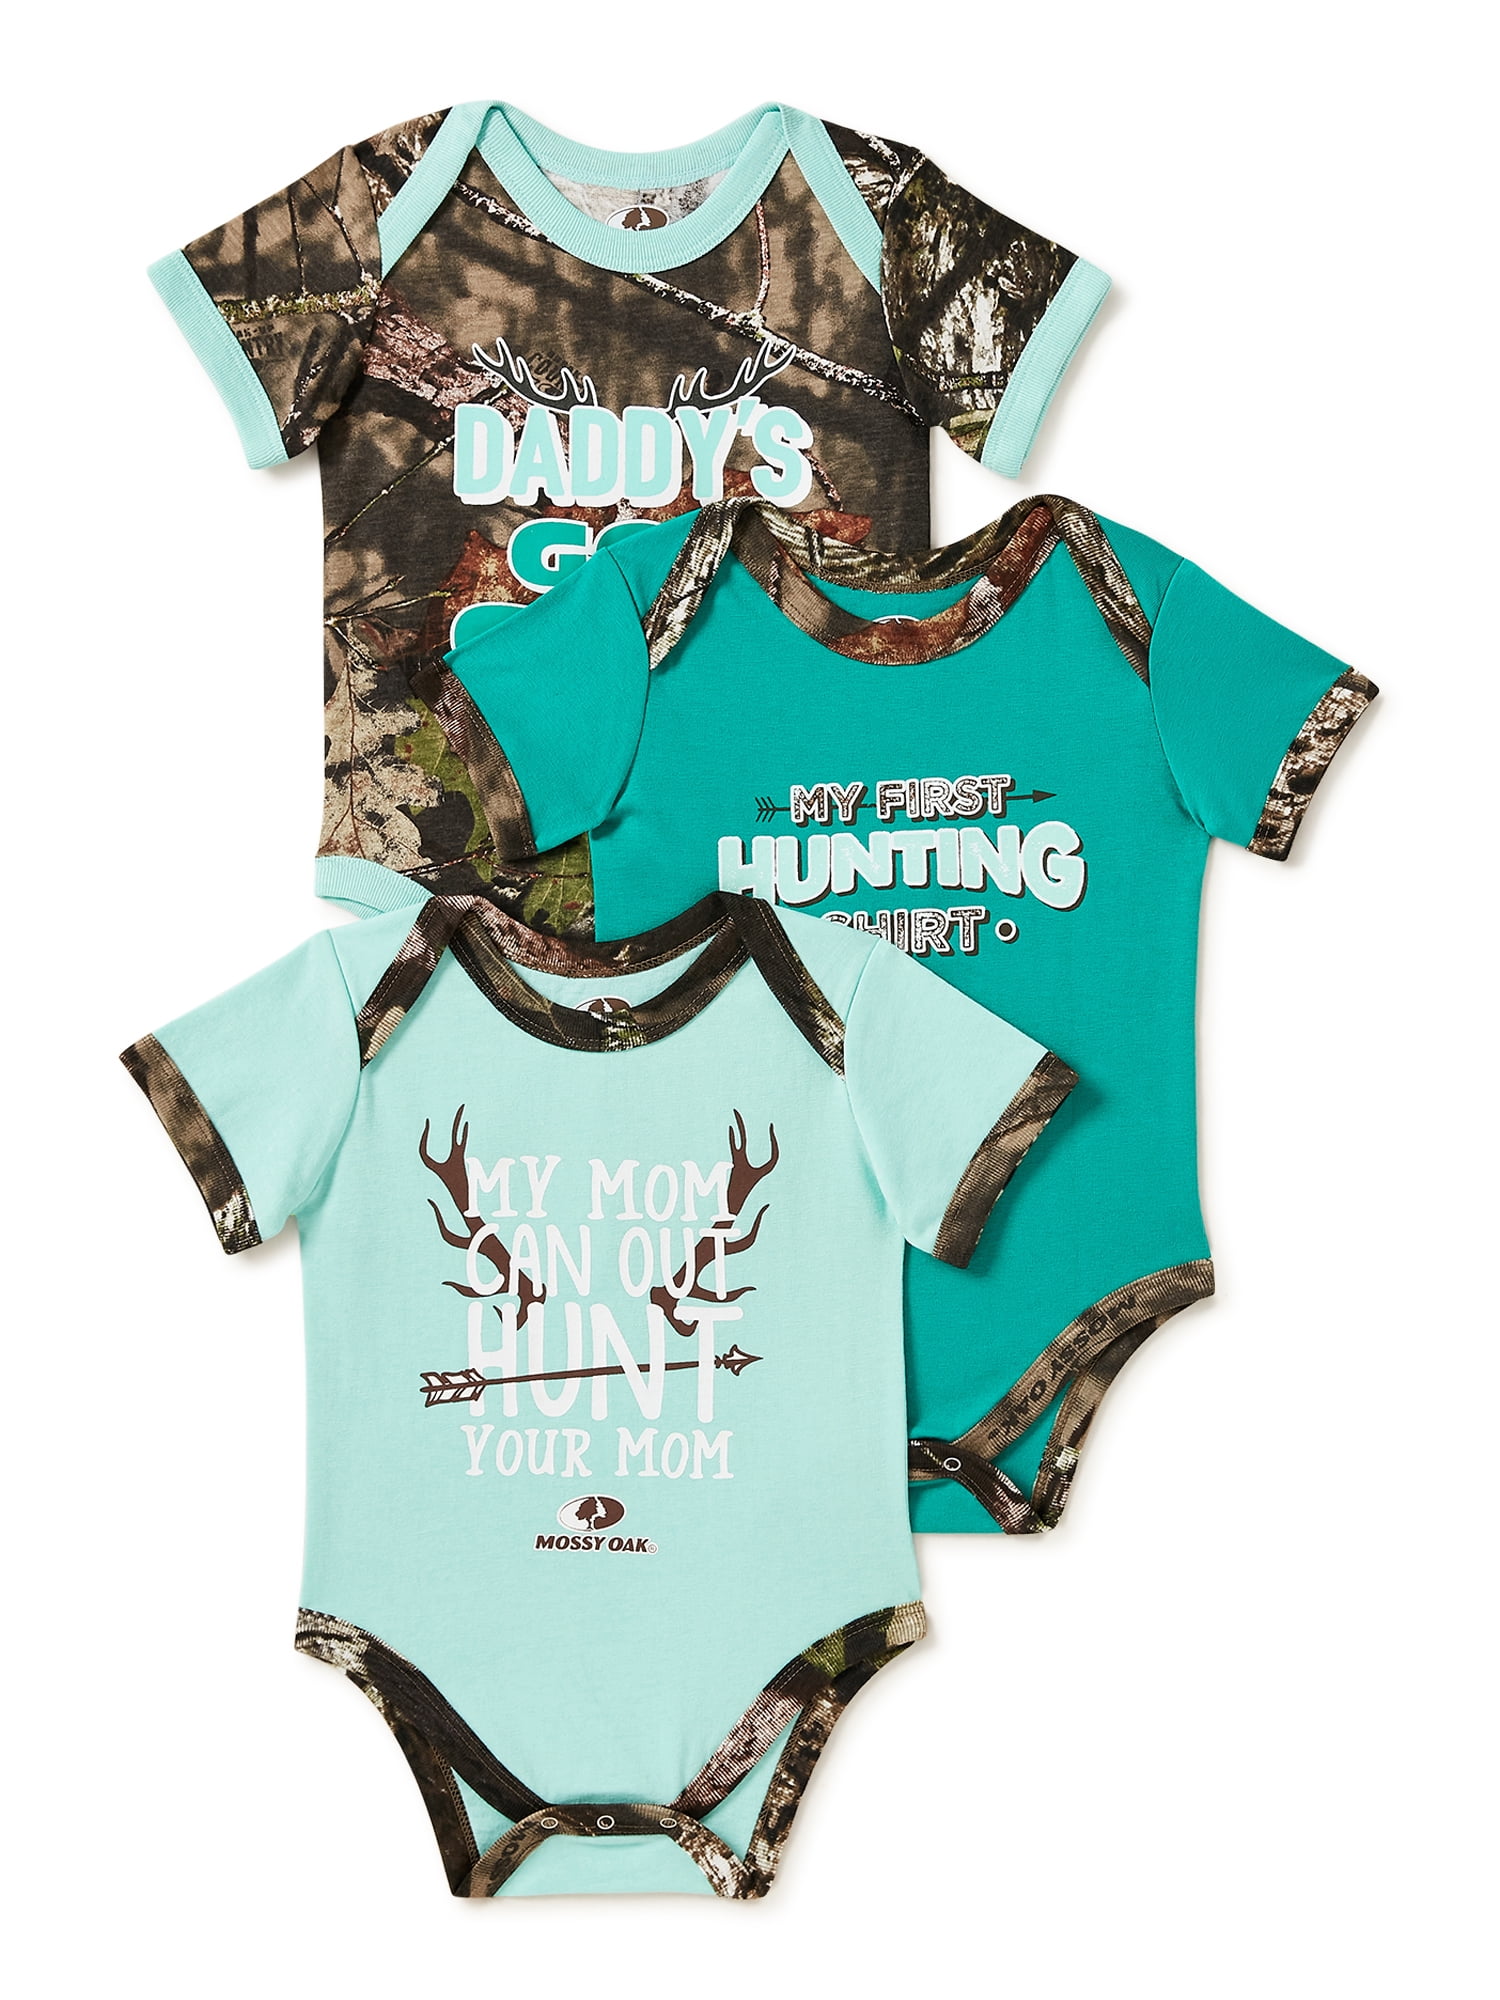 NEW Mossy Oak One Piece INFANT Baby Outfit Creeper Bodysuit Camo Hunting Romper 